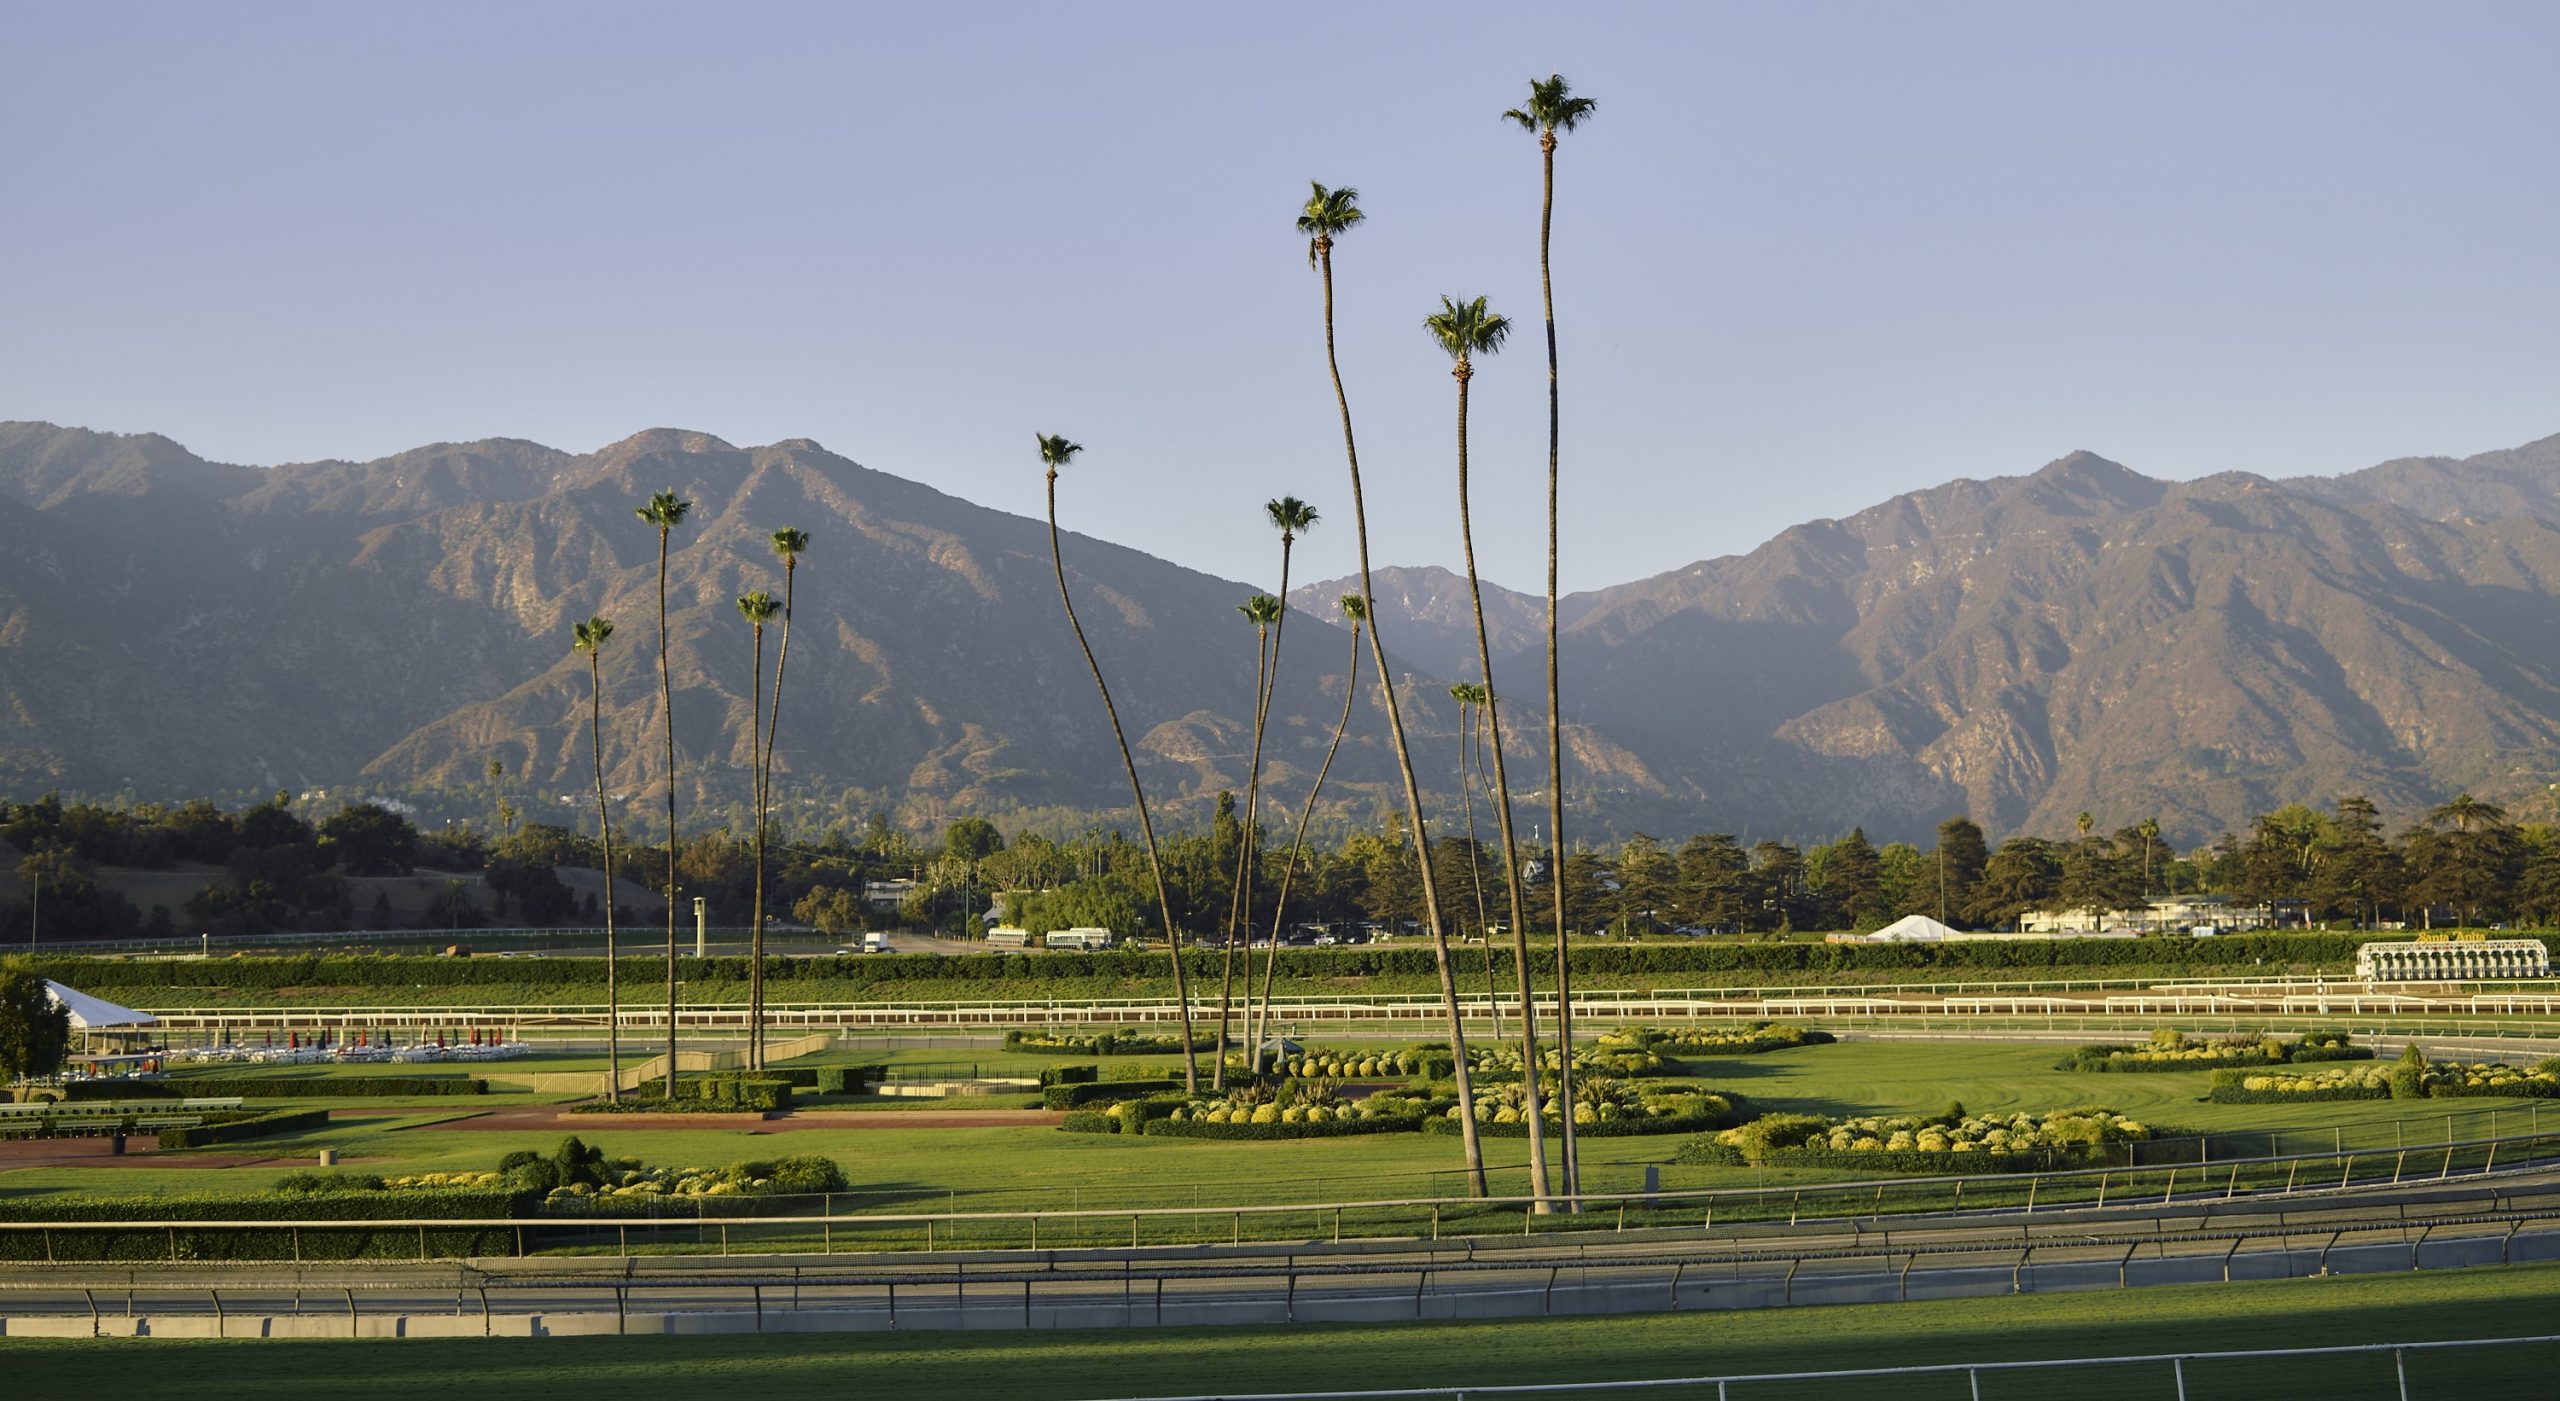 Santa Anita s Good Neighbors Policy Offers Support To The Community 